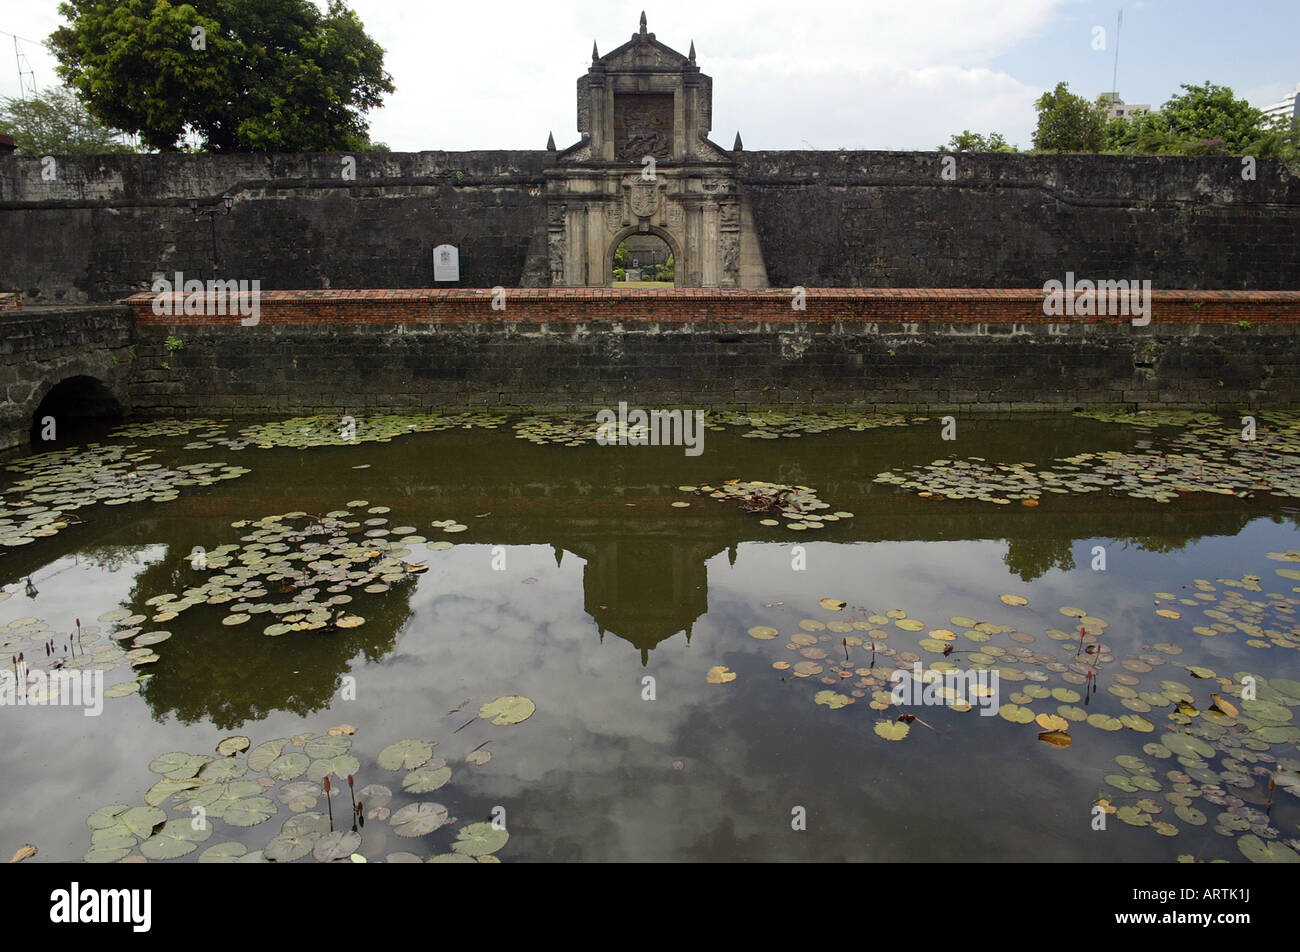 The main gate of Fort Santiago in the historic Intramuros section of Manila, Philippines. Stock Photo